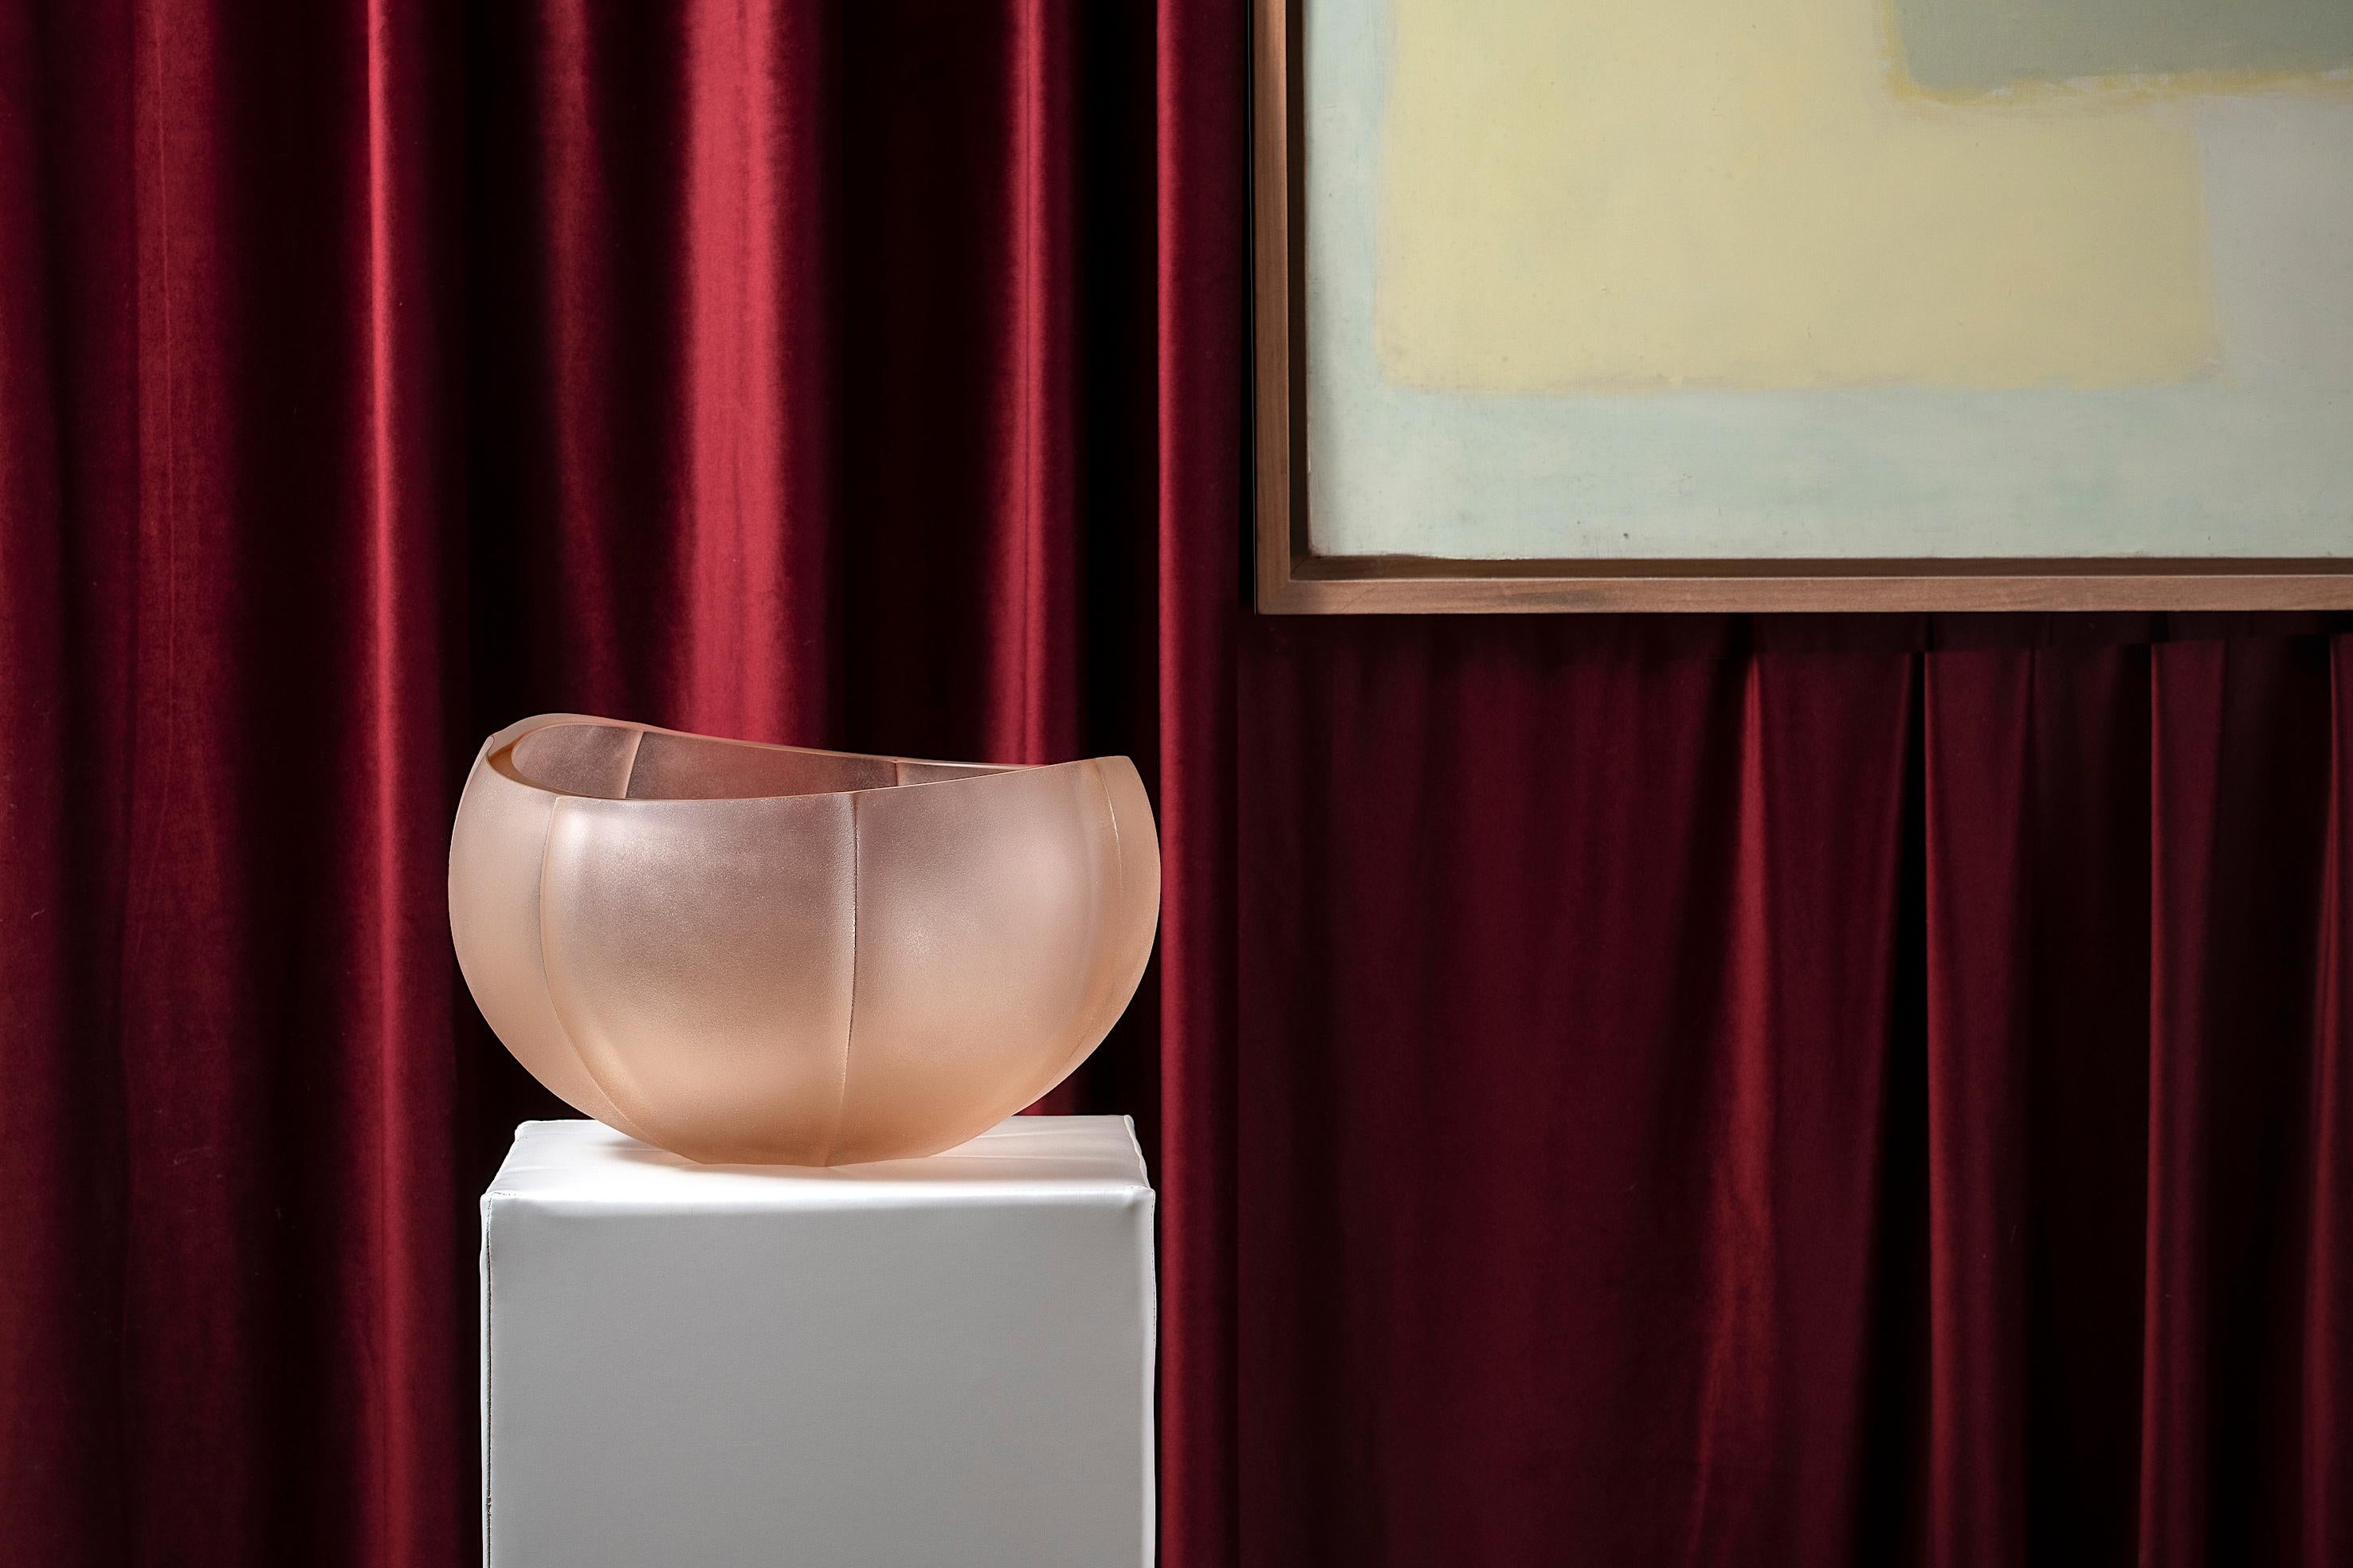 Linae medium vase, Murano glass, designed by Federico Peri, 21st century.
The Linae vase, circular pots with a blunt rim are made in solid color and thick blown Murano glass, are available in three different shapes and different finishes /